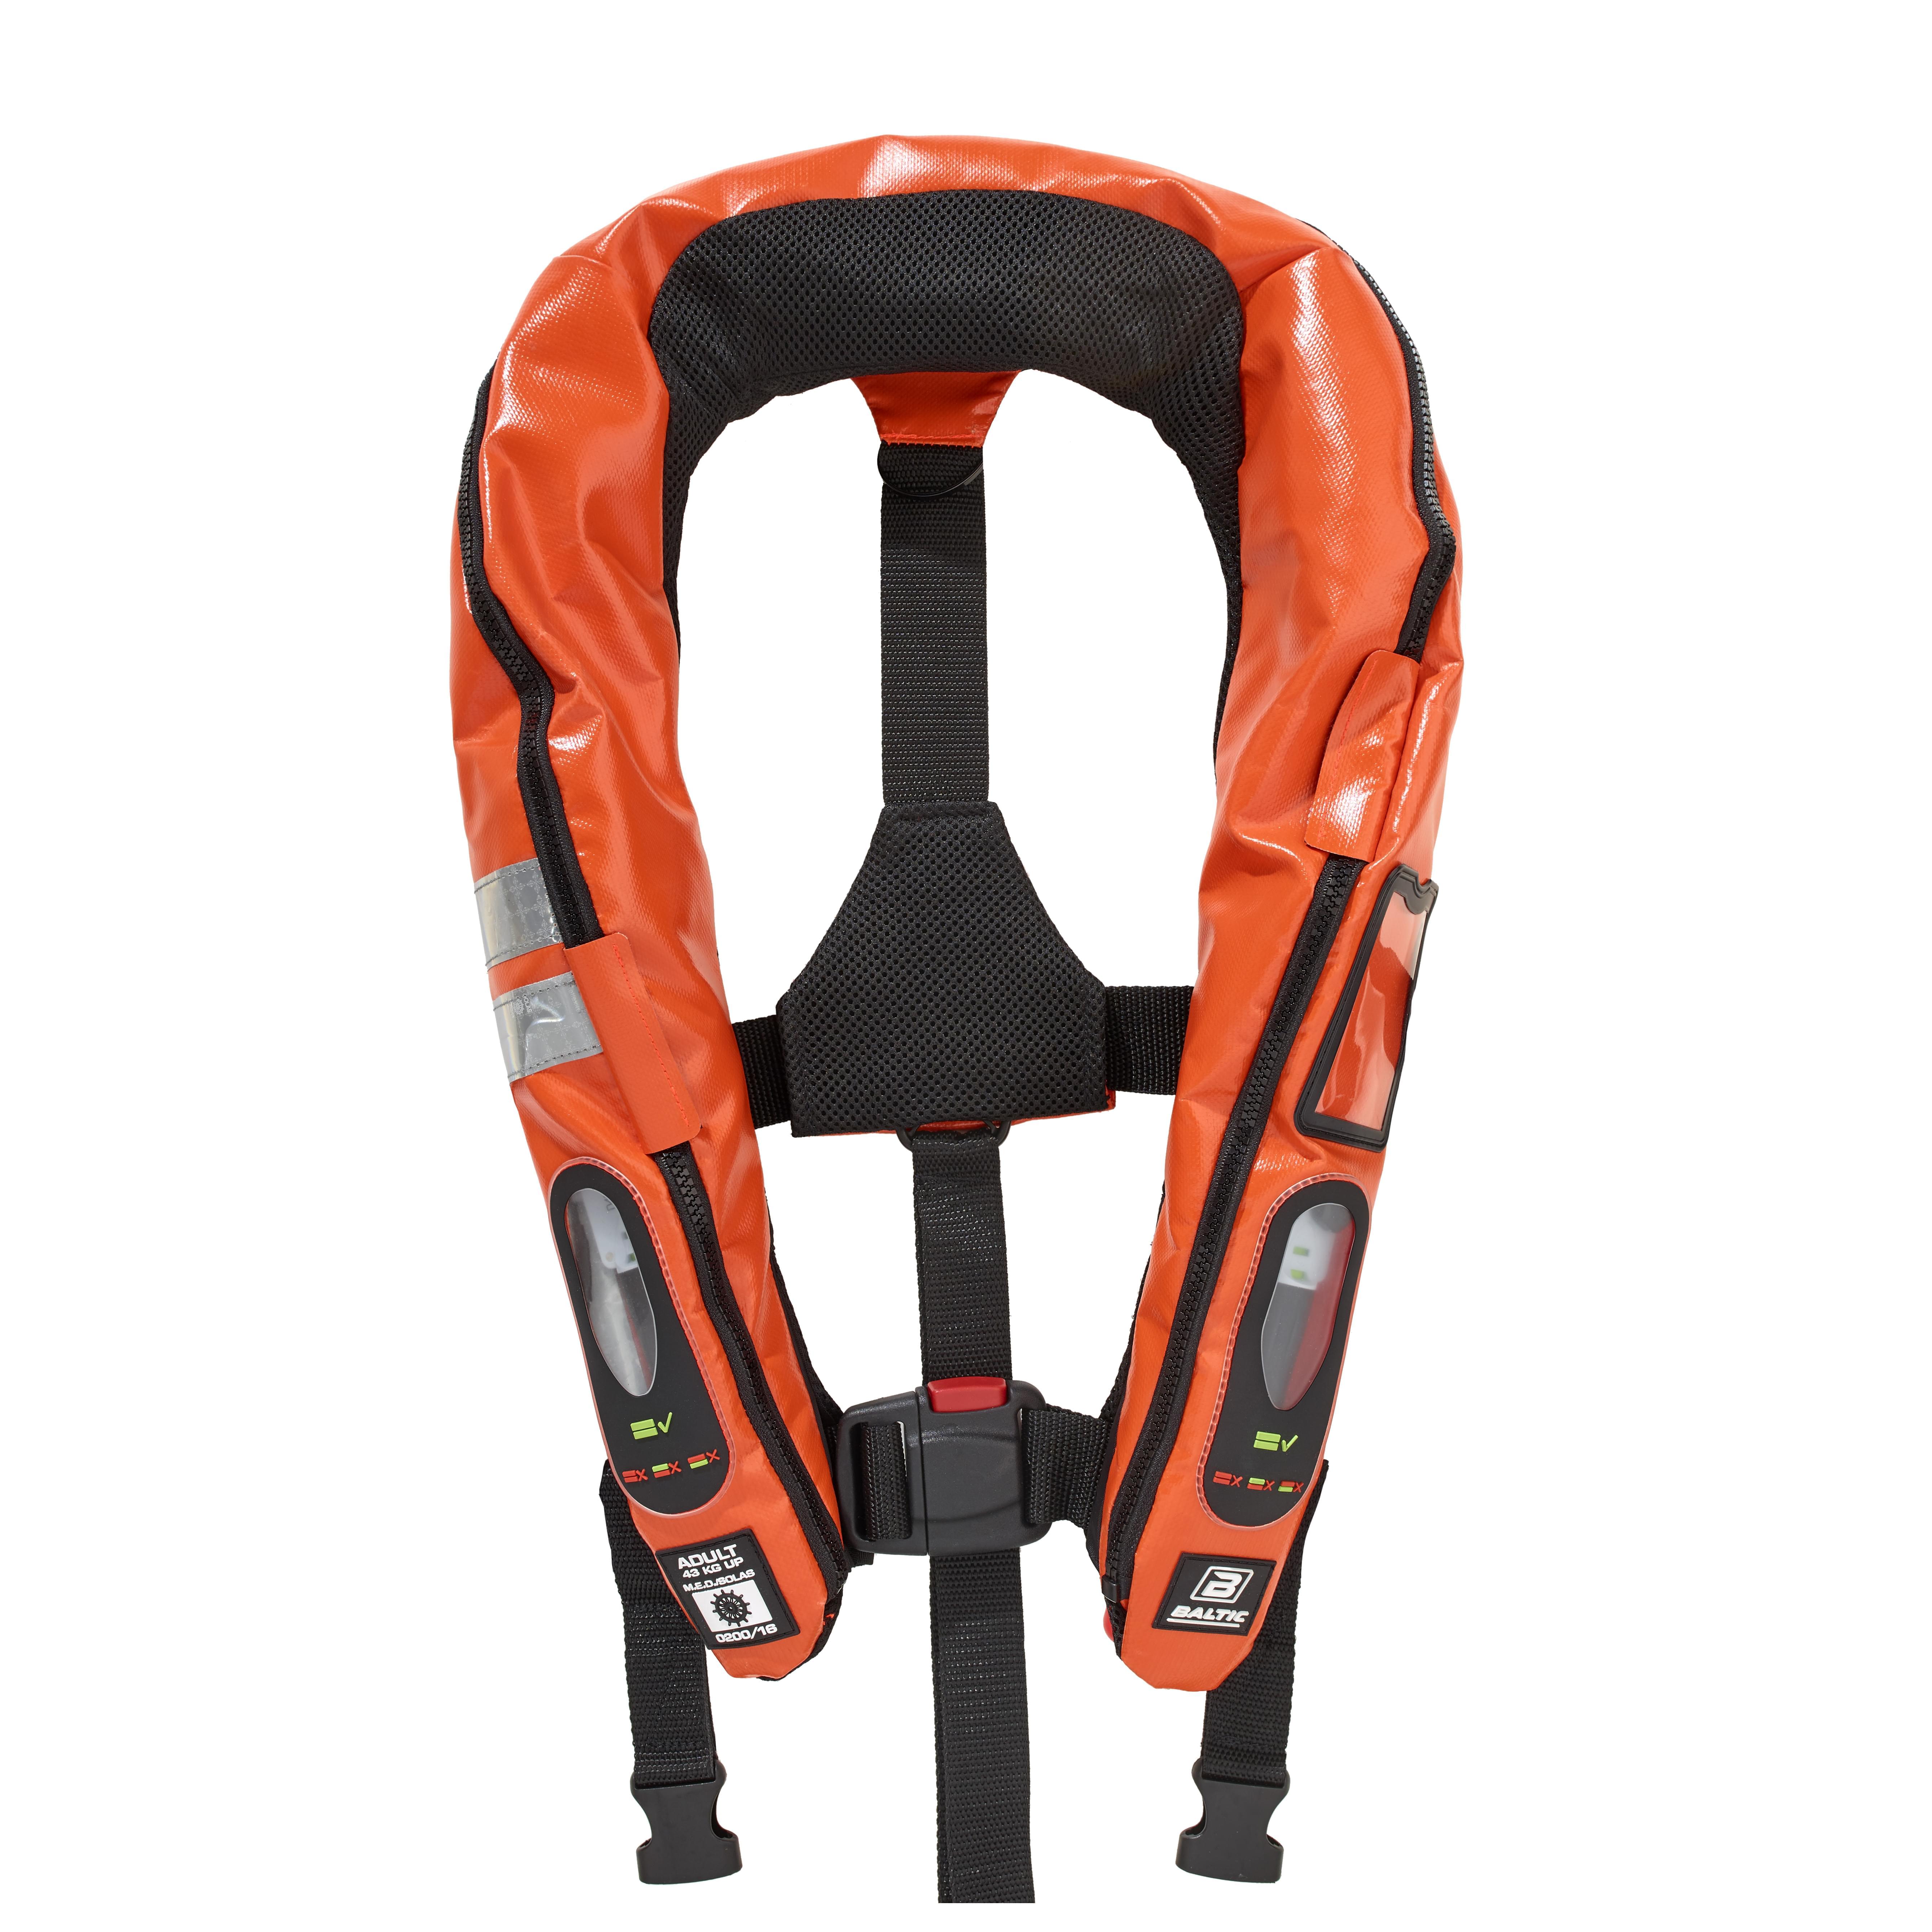 Commercial Life Jackets for optimal safety | Crew Safe